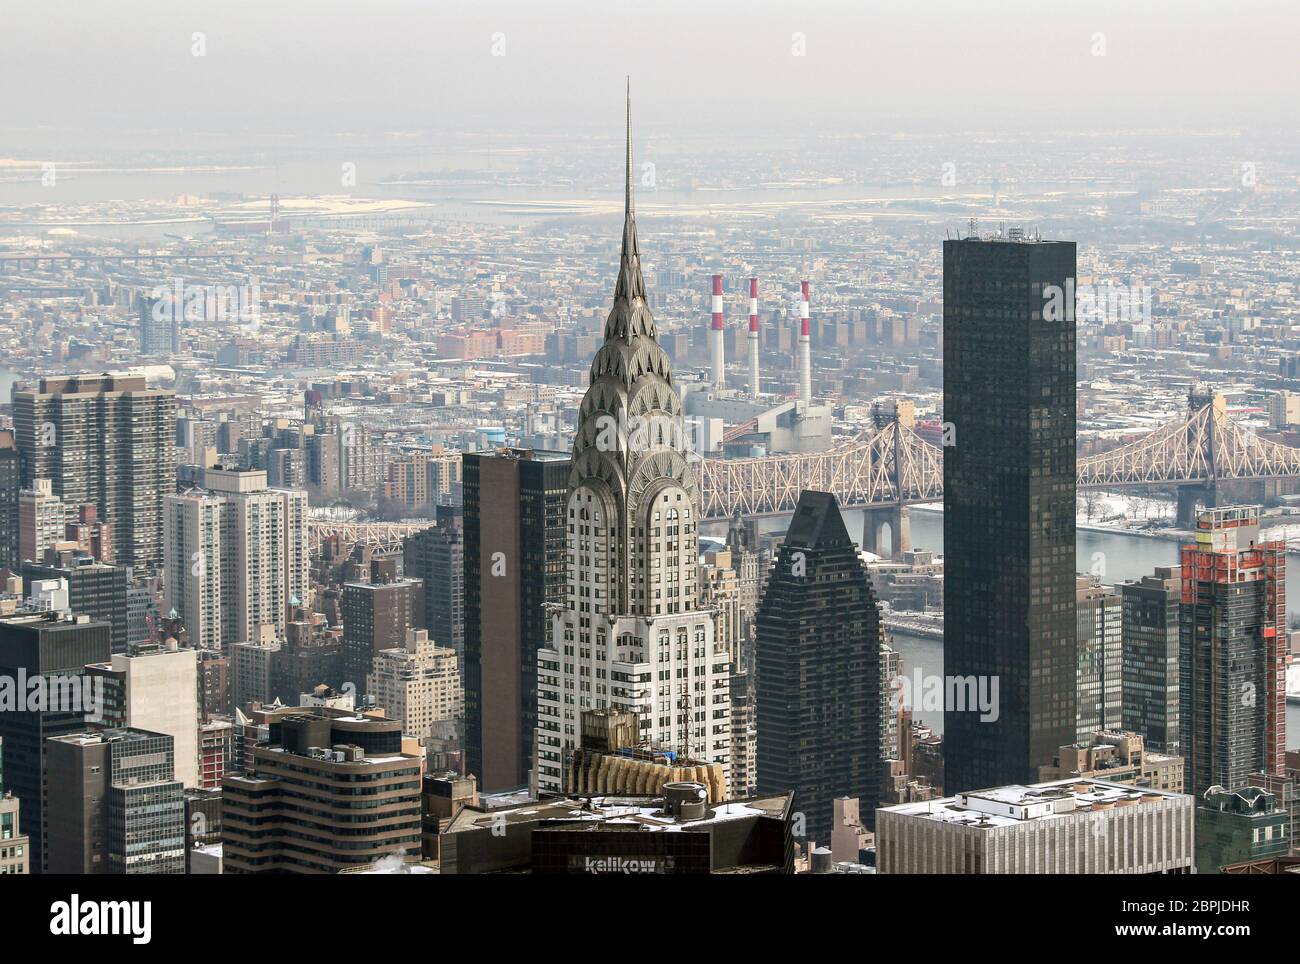 Aerial view of Midtown Manhattan skyscrapers, iconic Chrysler Building in the middle and Trump World Tower on the right, in New York City, USA Stock Photo